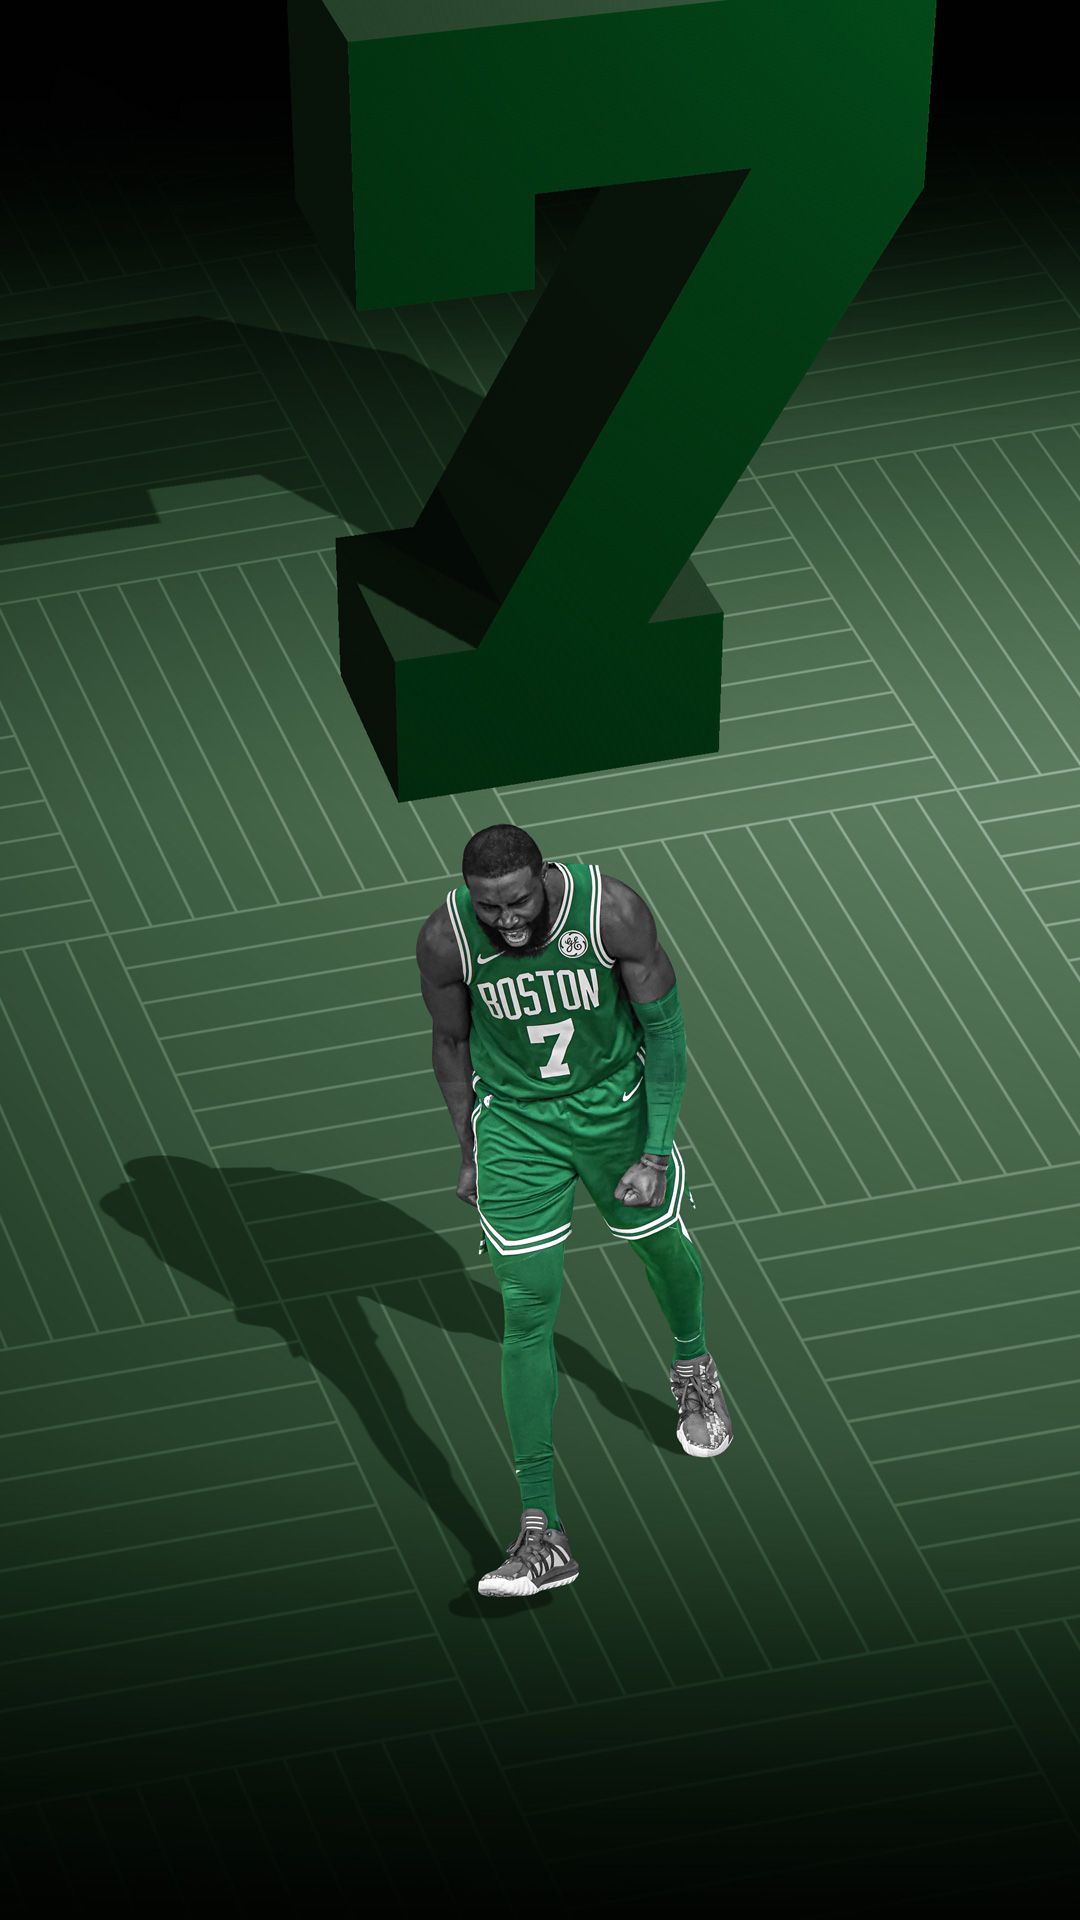 Download Boston Celtics wallpapers for mobile phone, free Boston Celtics  HD pictures